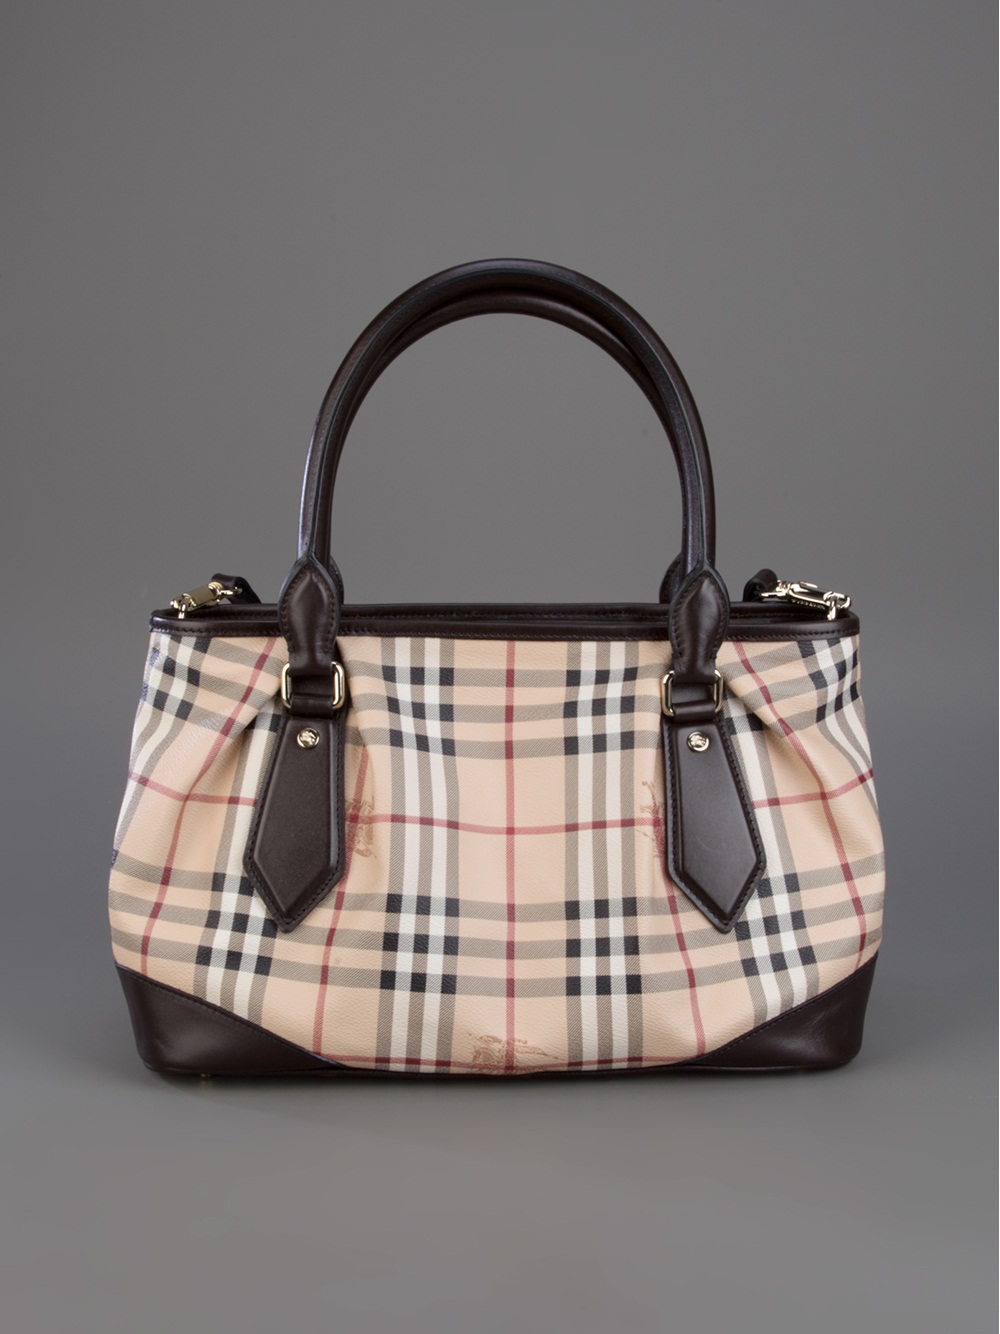 Burberry Tote Bag in Natural - Lyst